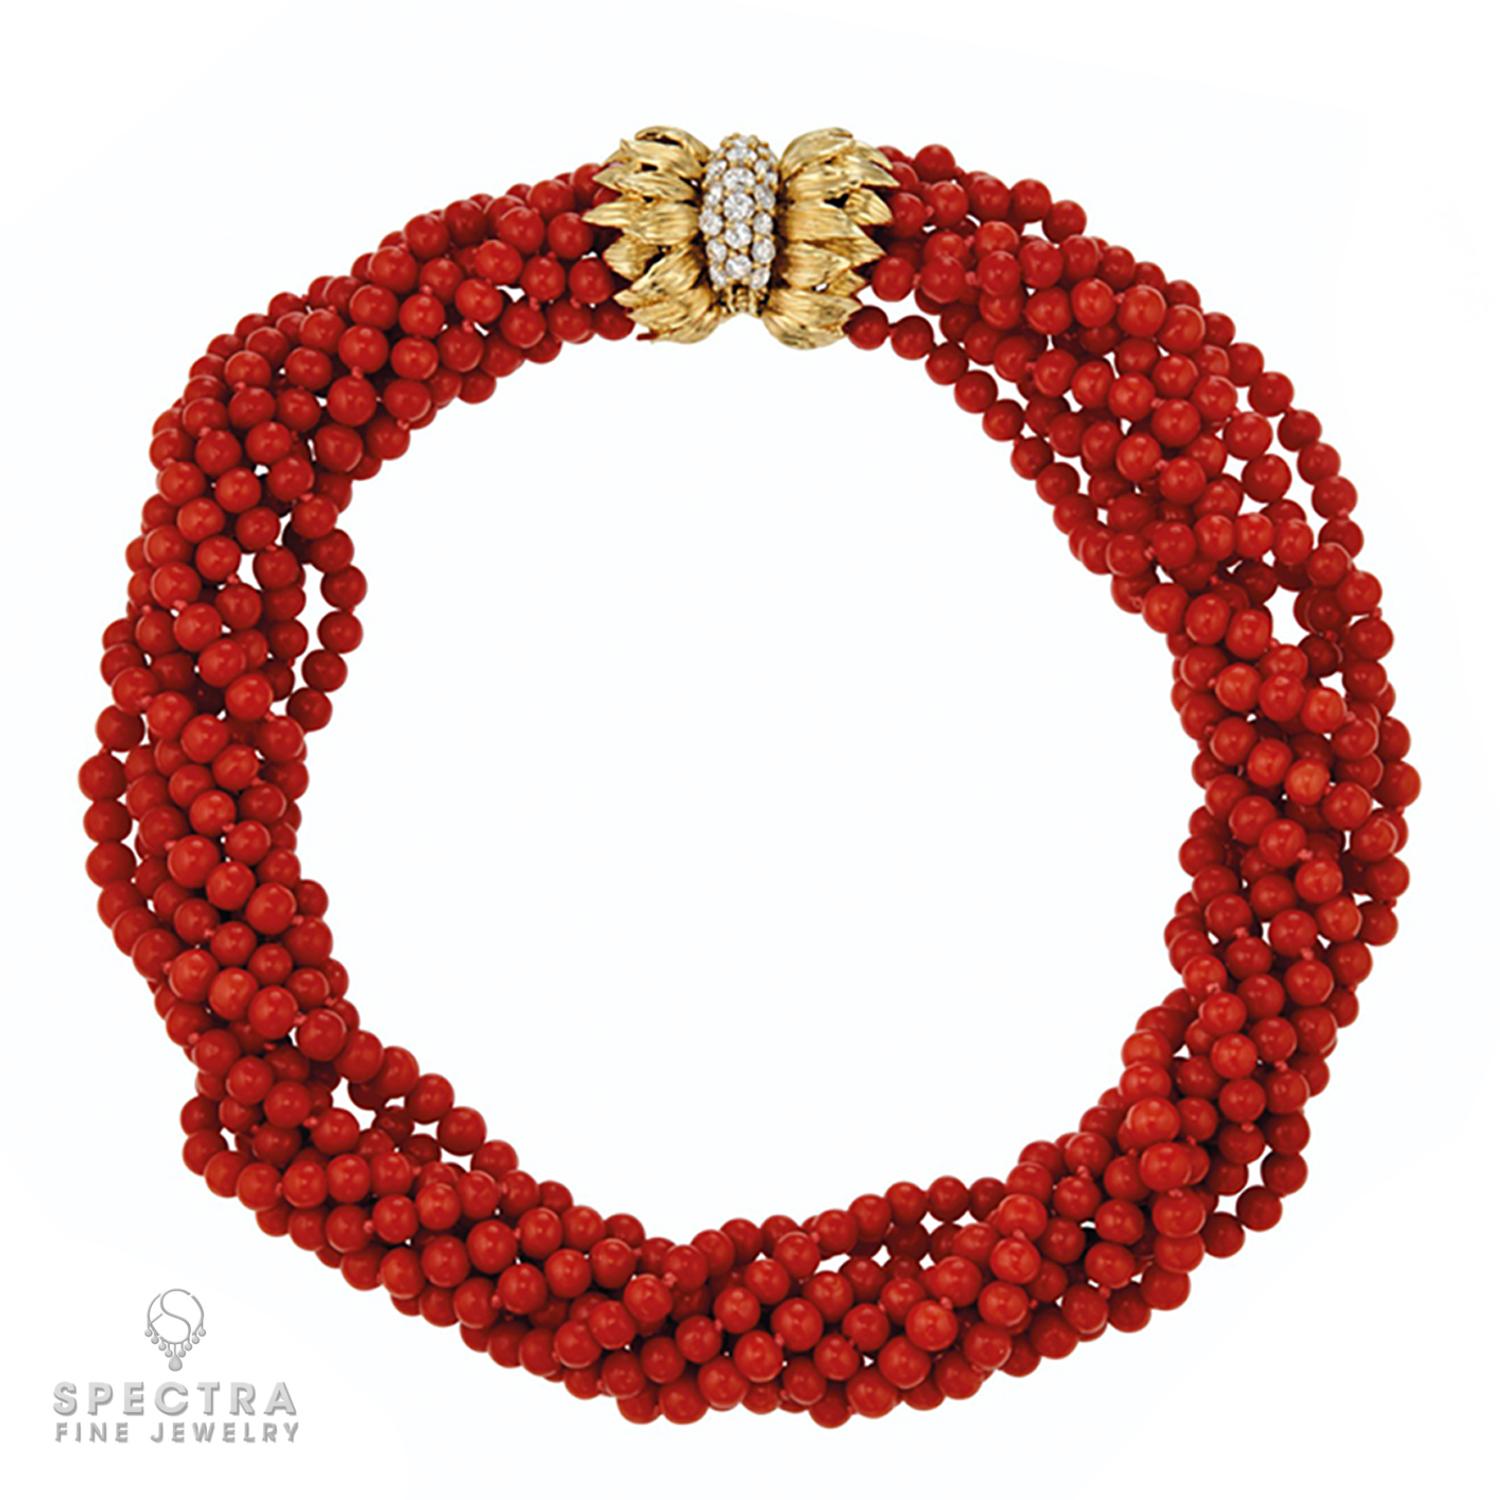 Cartier's Coral Diamond Necklace and Bracelet Suite stands as a testament to refined elegance and sophisticated design. This exquisite ensemble features a Torsade necklace alongside a perfectly matching Torsade bracelet, each piece meticulously